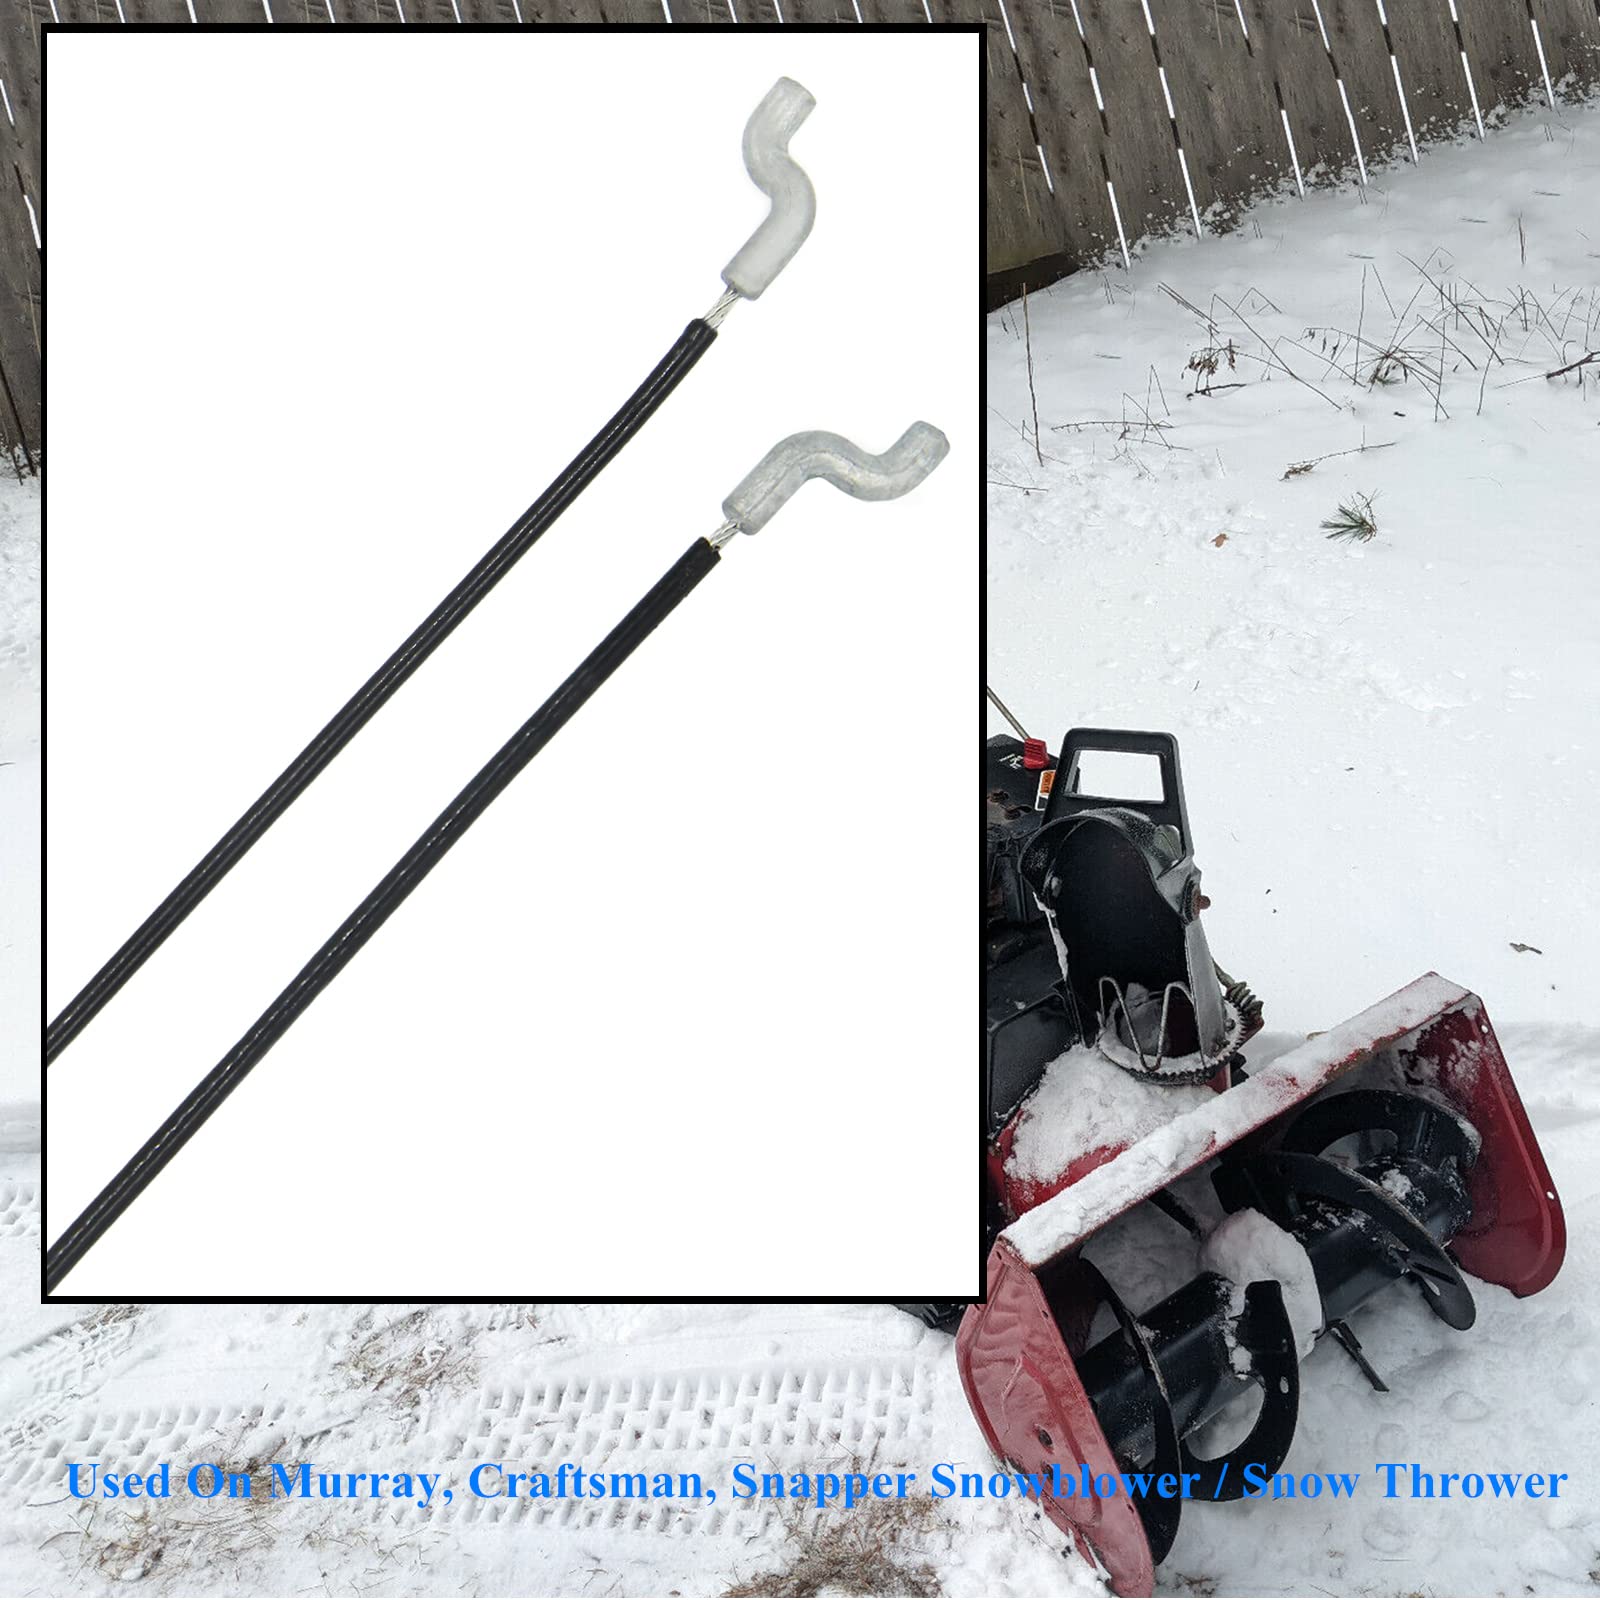 AILEETE 1501122MA Front Drive Lower Cable for Murray Craftsman Snowblower Snow Thrower 313449MA 1501122 MT1501122MA